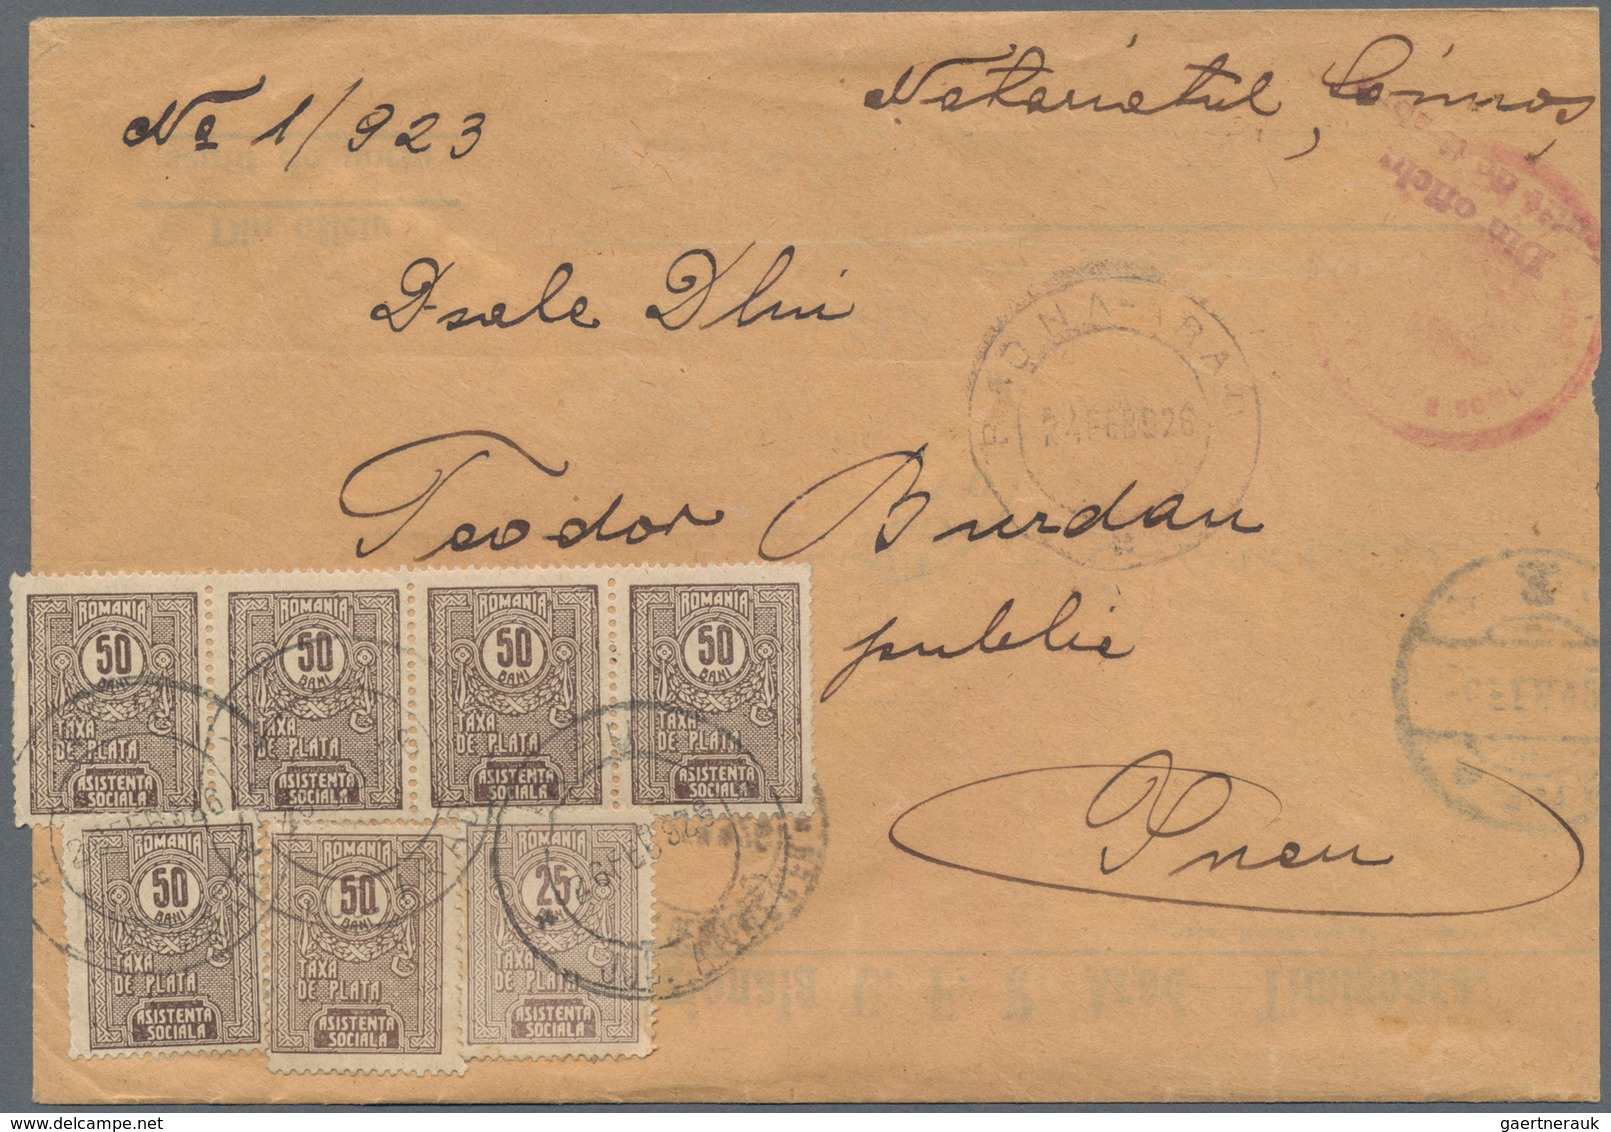 Rumänien - Portomarken: 1882/1940, assortment of apprx. 54 insufficiently paid covers/cards and bear